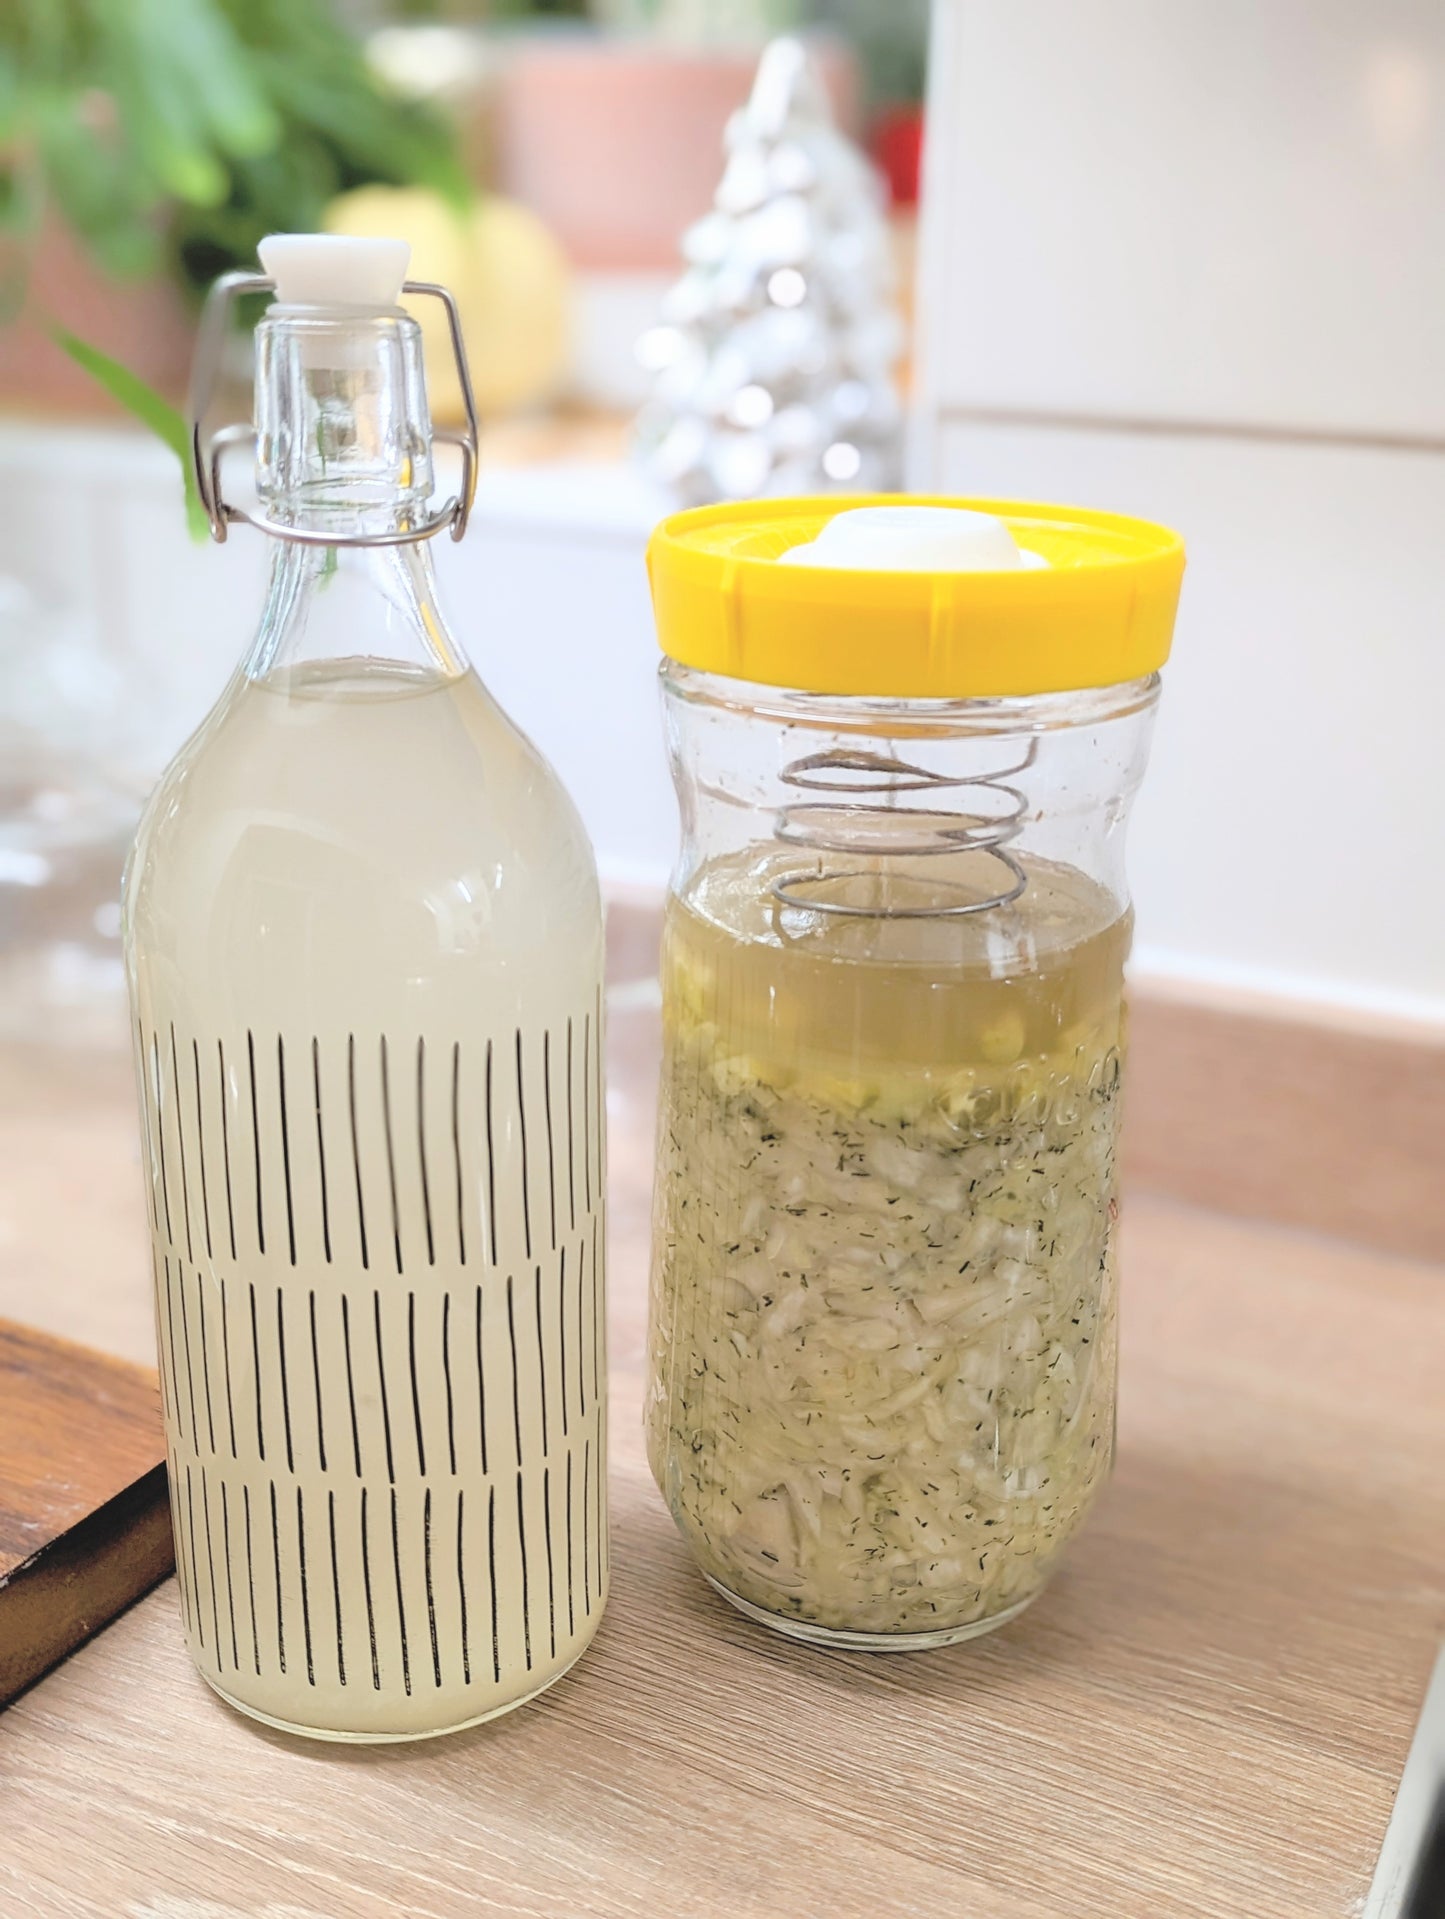 Learn how to ferment water kefir, sauerkraut and basil tomatoes!